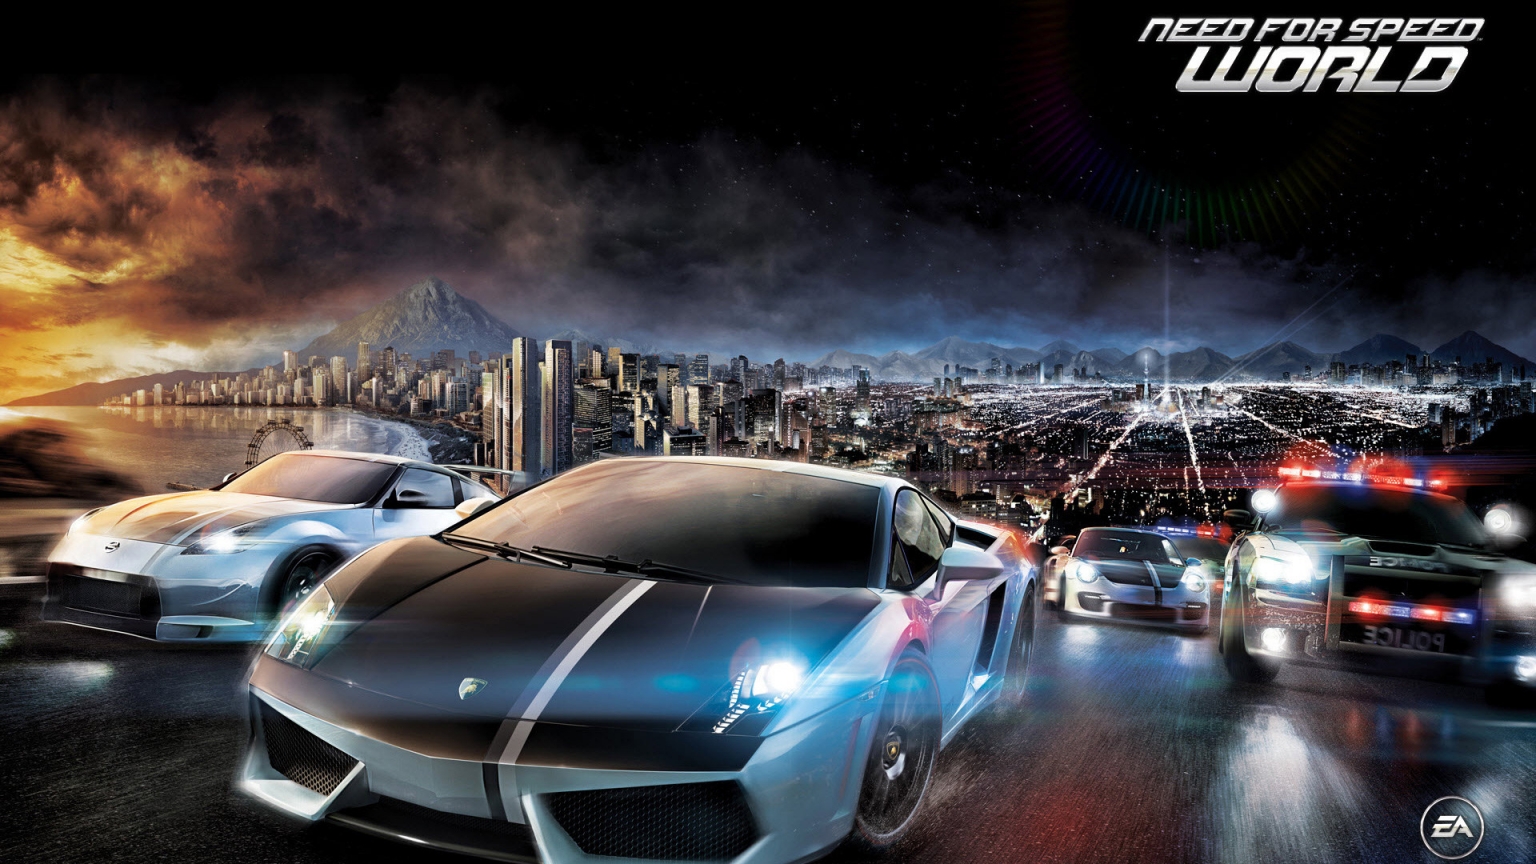 Need for Speed World for 1536 x 864 HDTV resolution